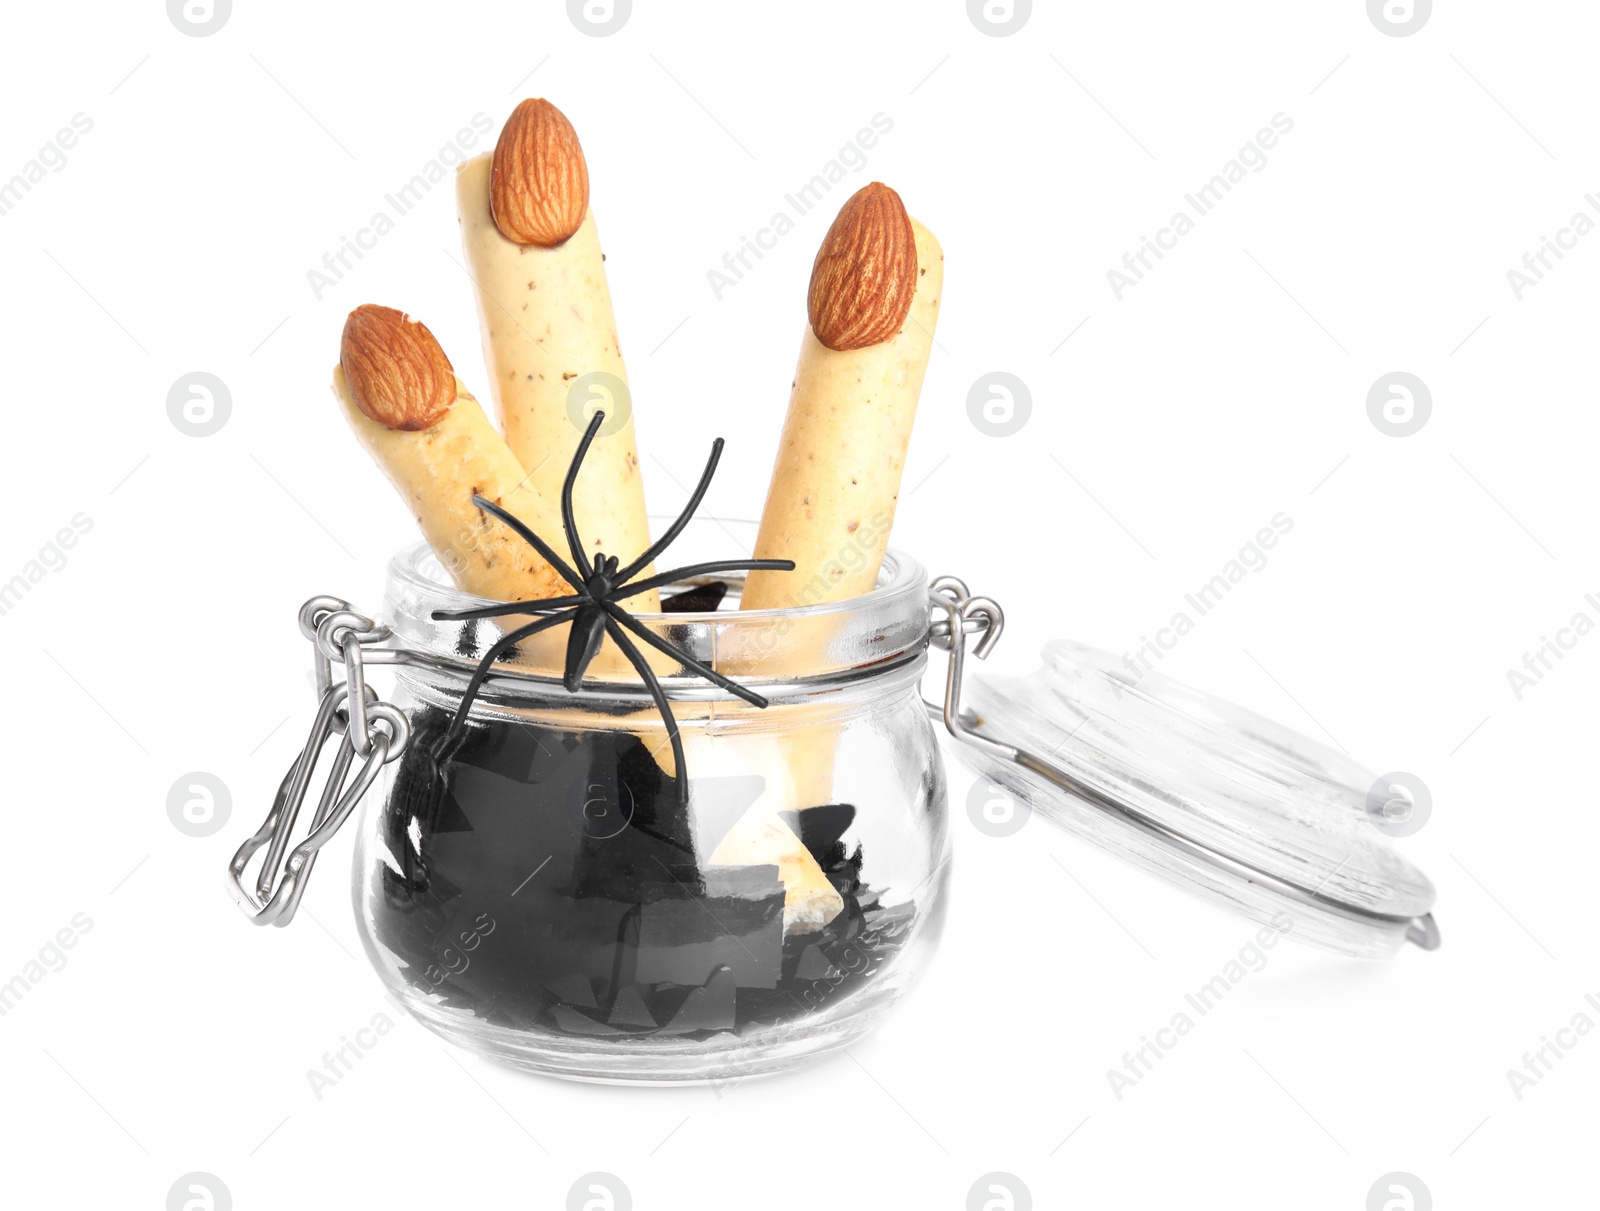 Photo of Delicious desserts decorated as monster fingers on white background. Halloween treat